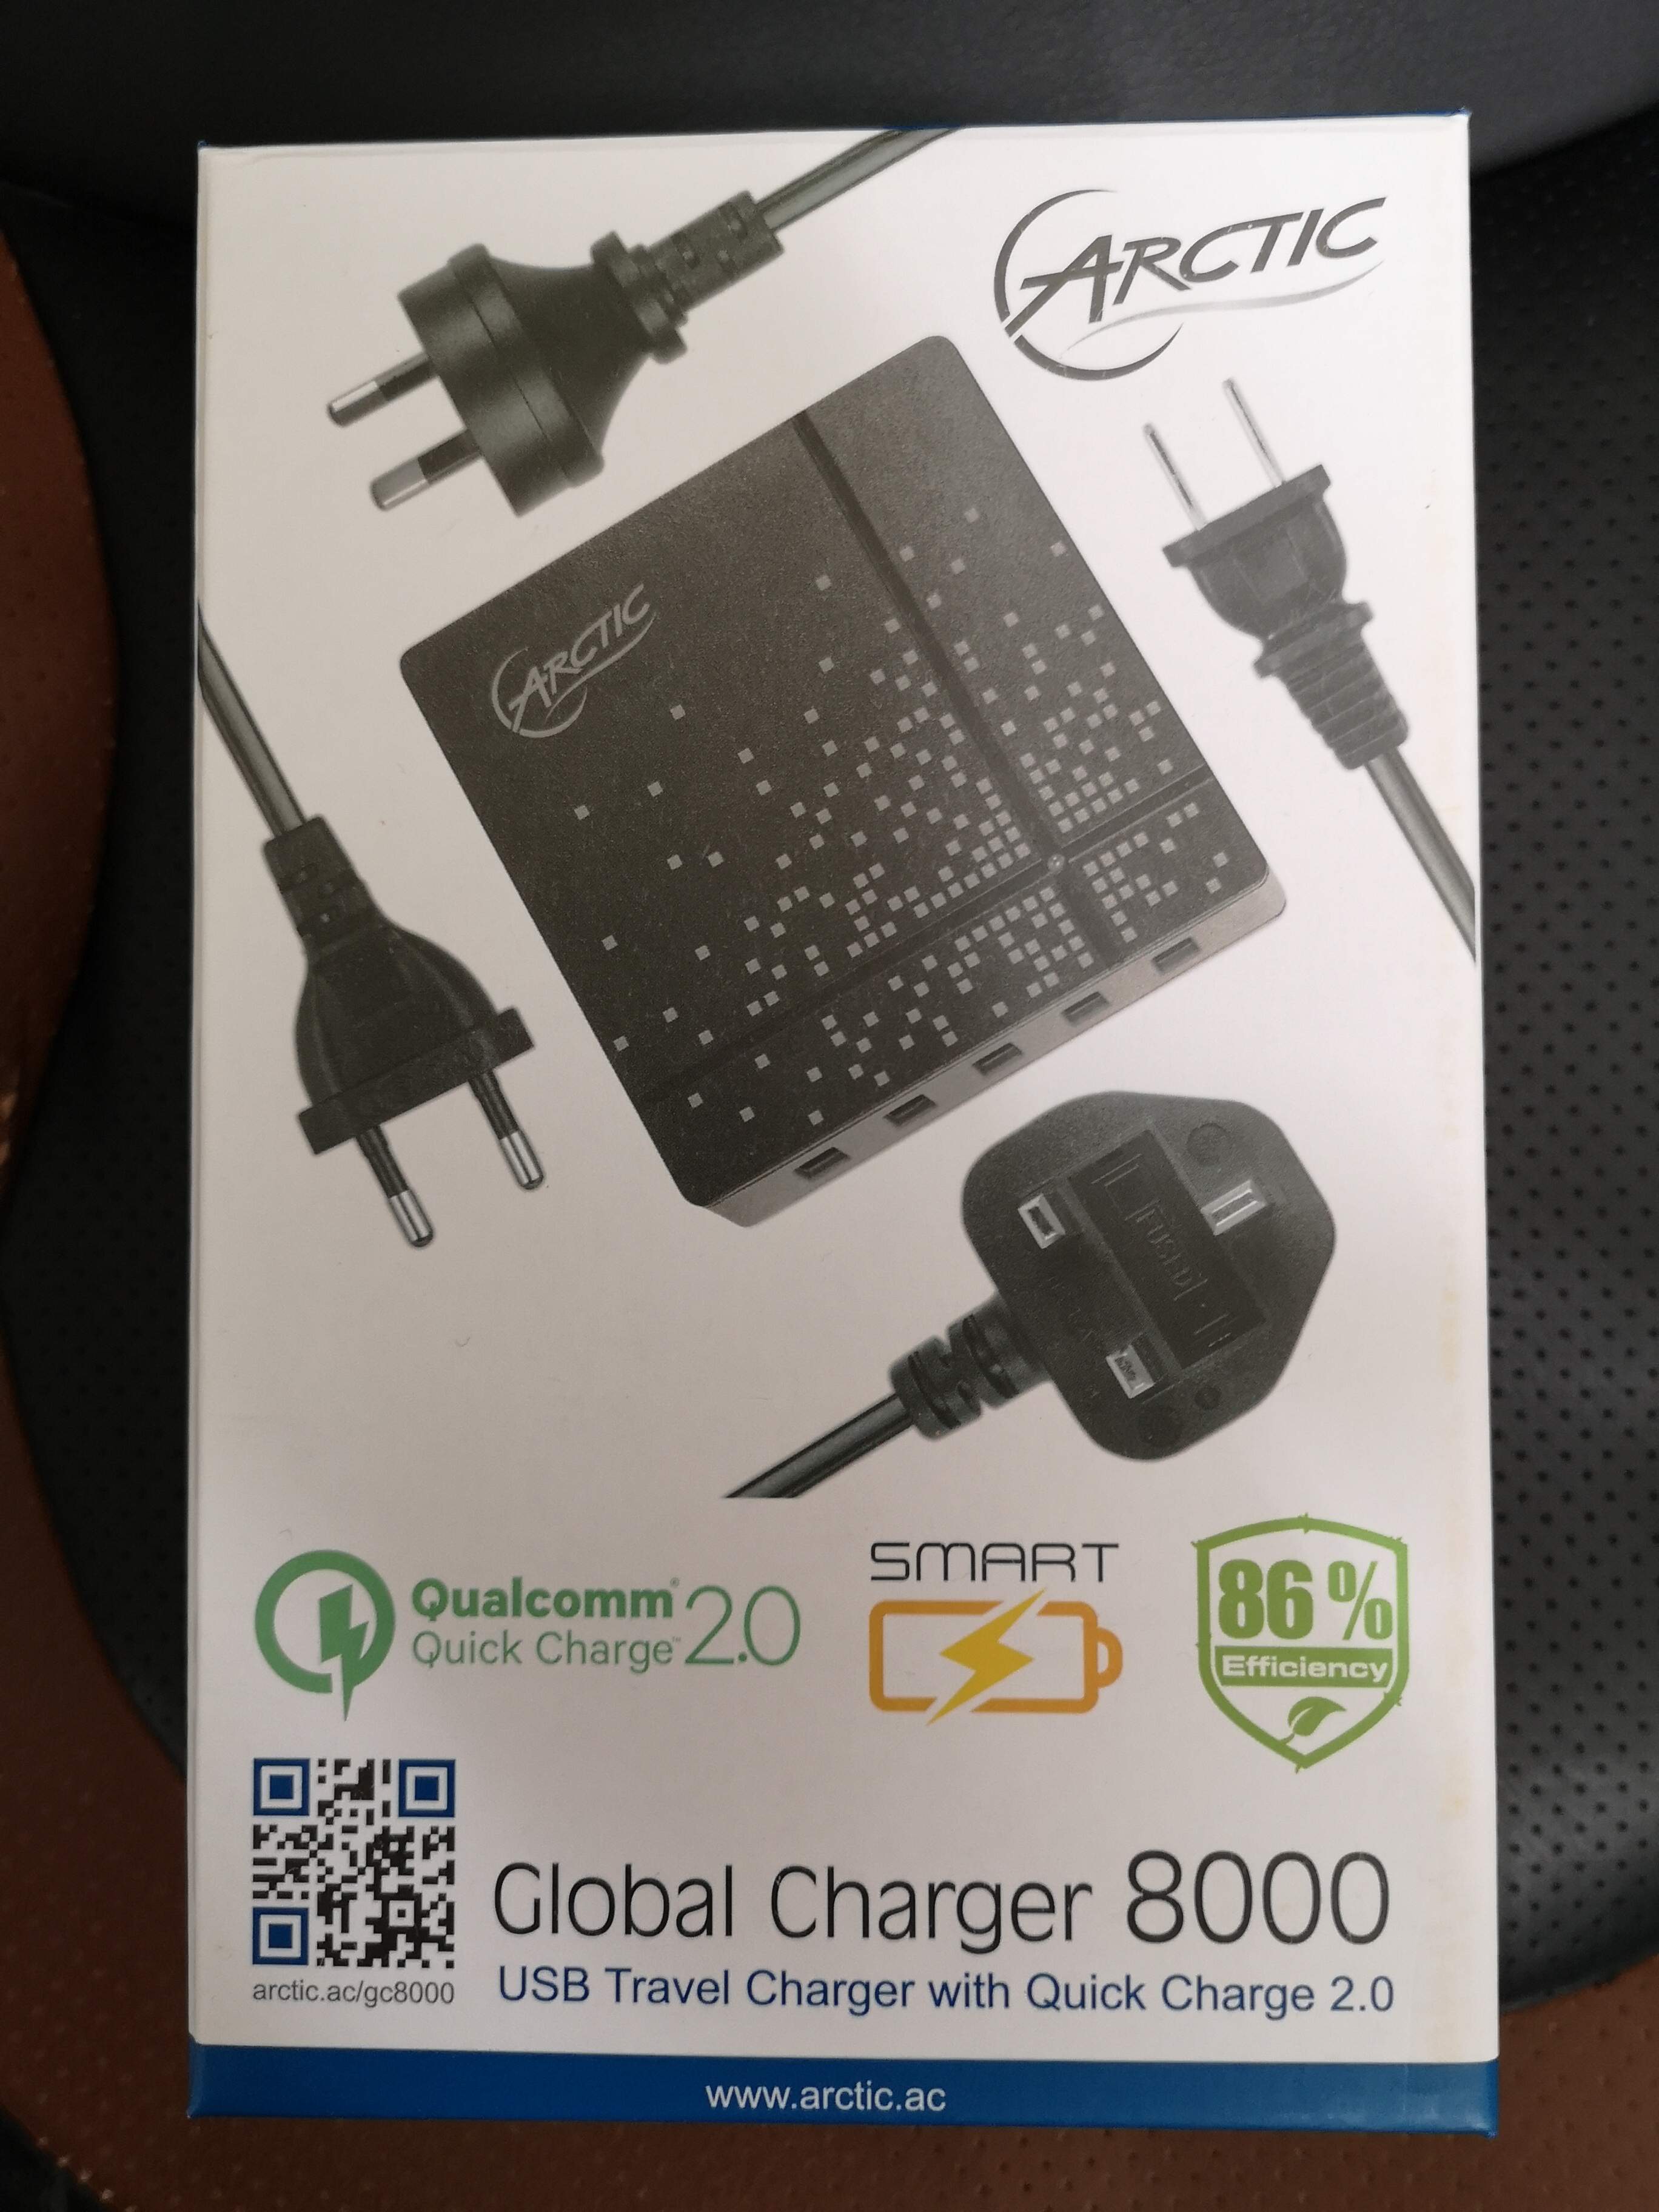 ARCTIC Global Charger 8000